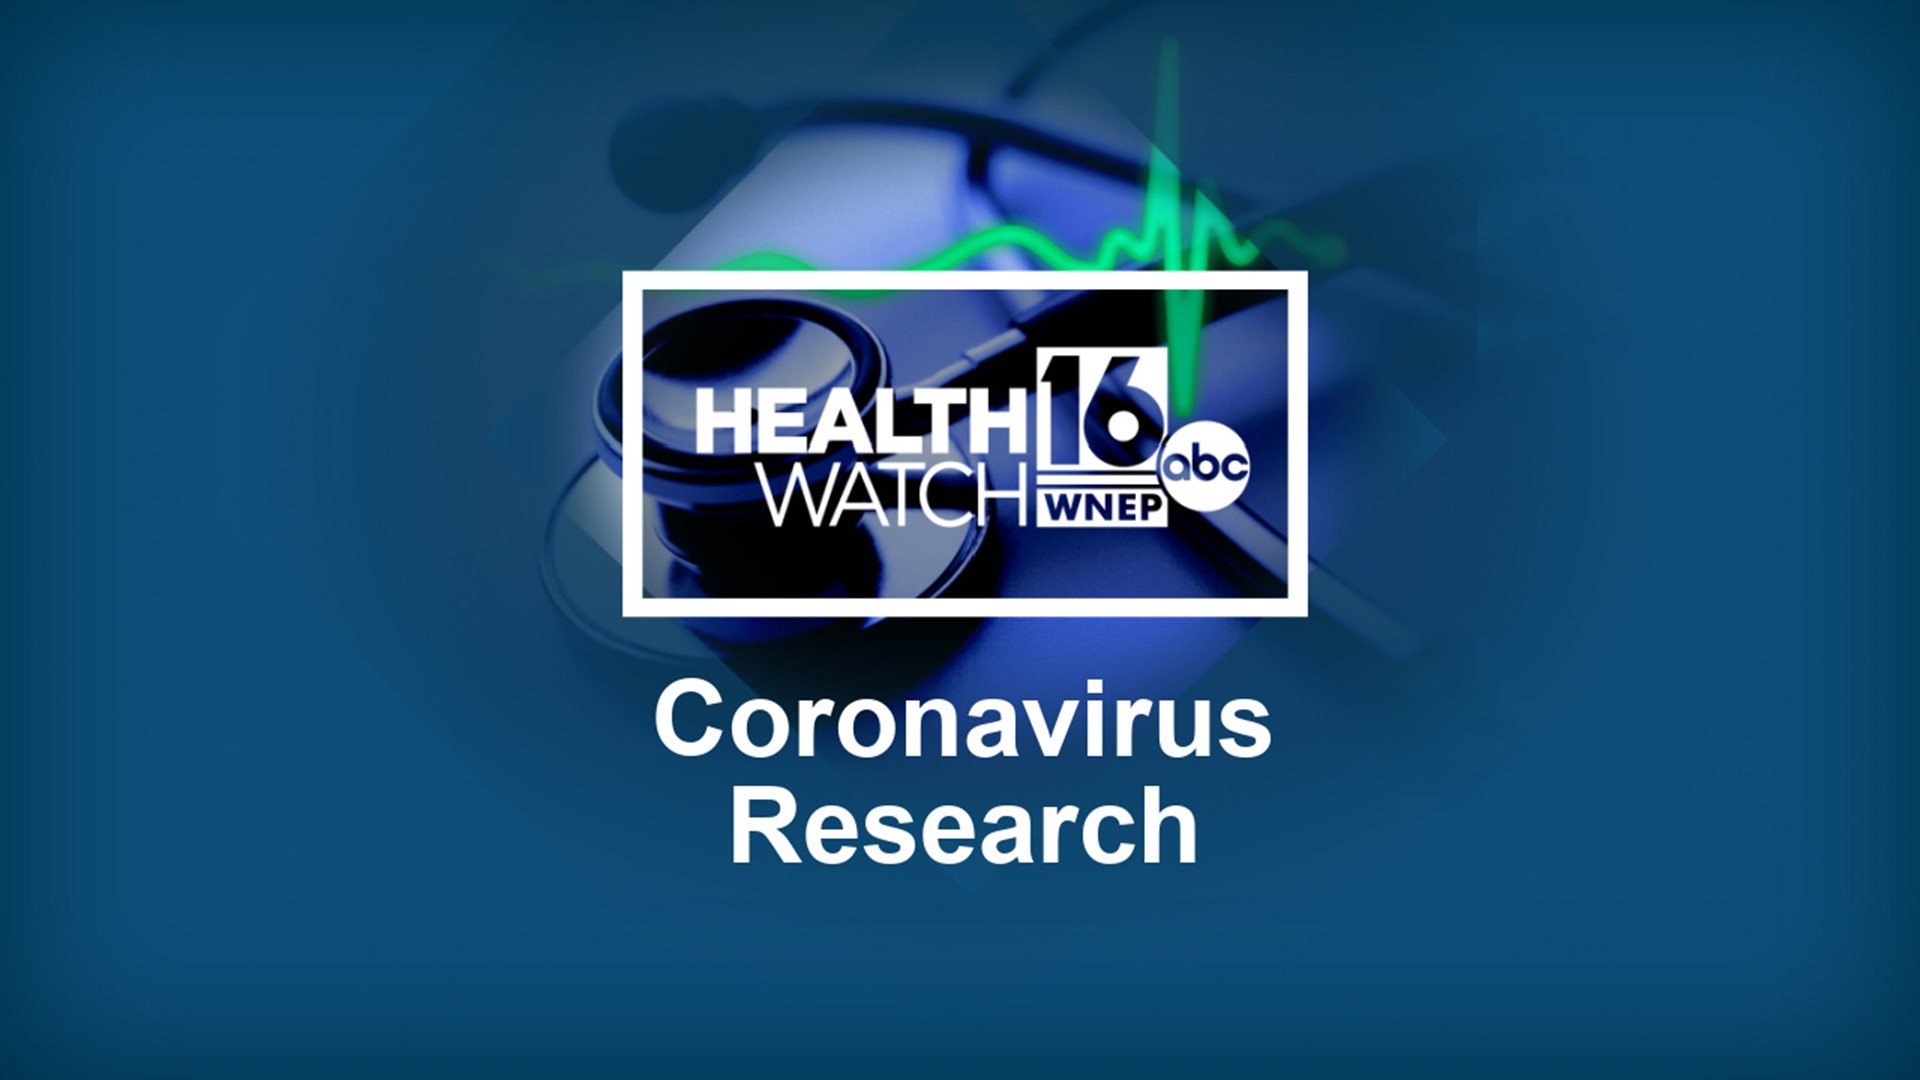 A team of Geisinger researchers is looking into whether someone has an increased risk of stroke after having COVID-19 and which patients are most impacted.